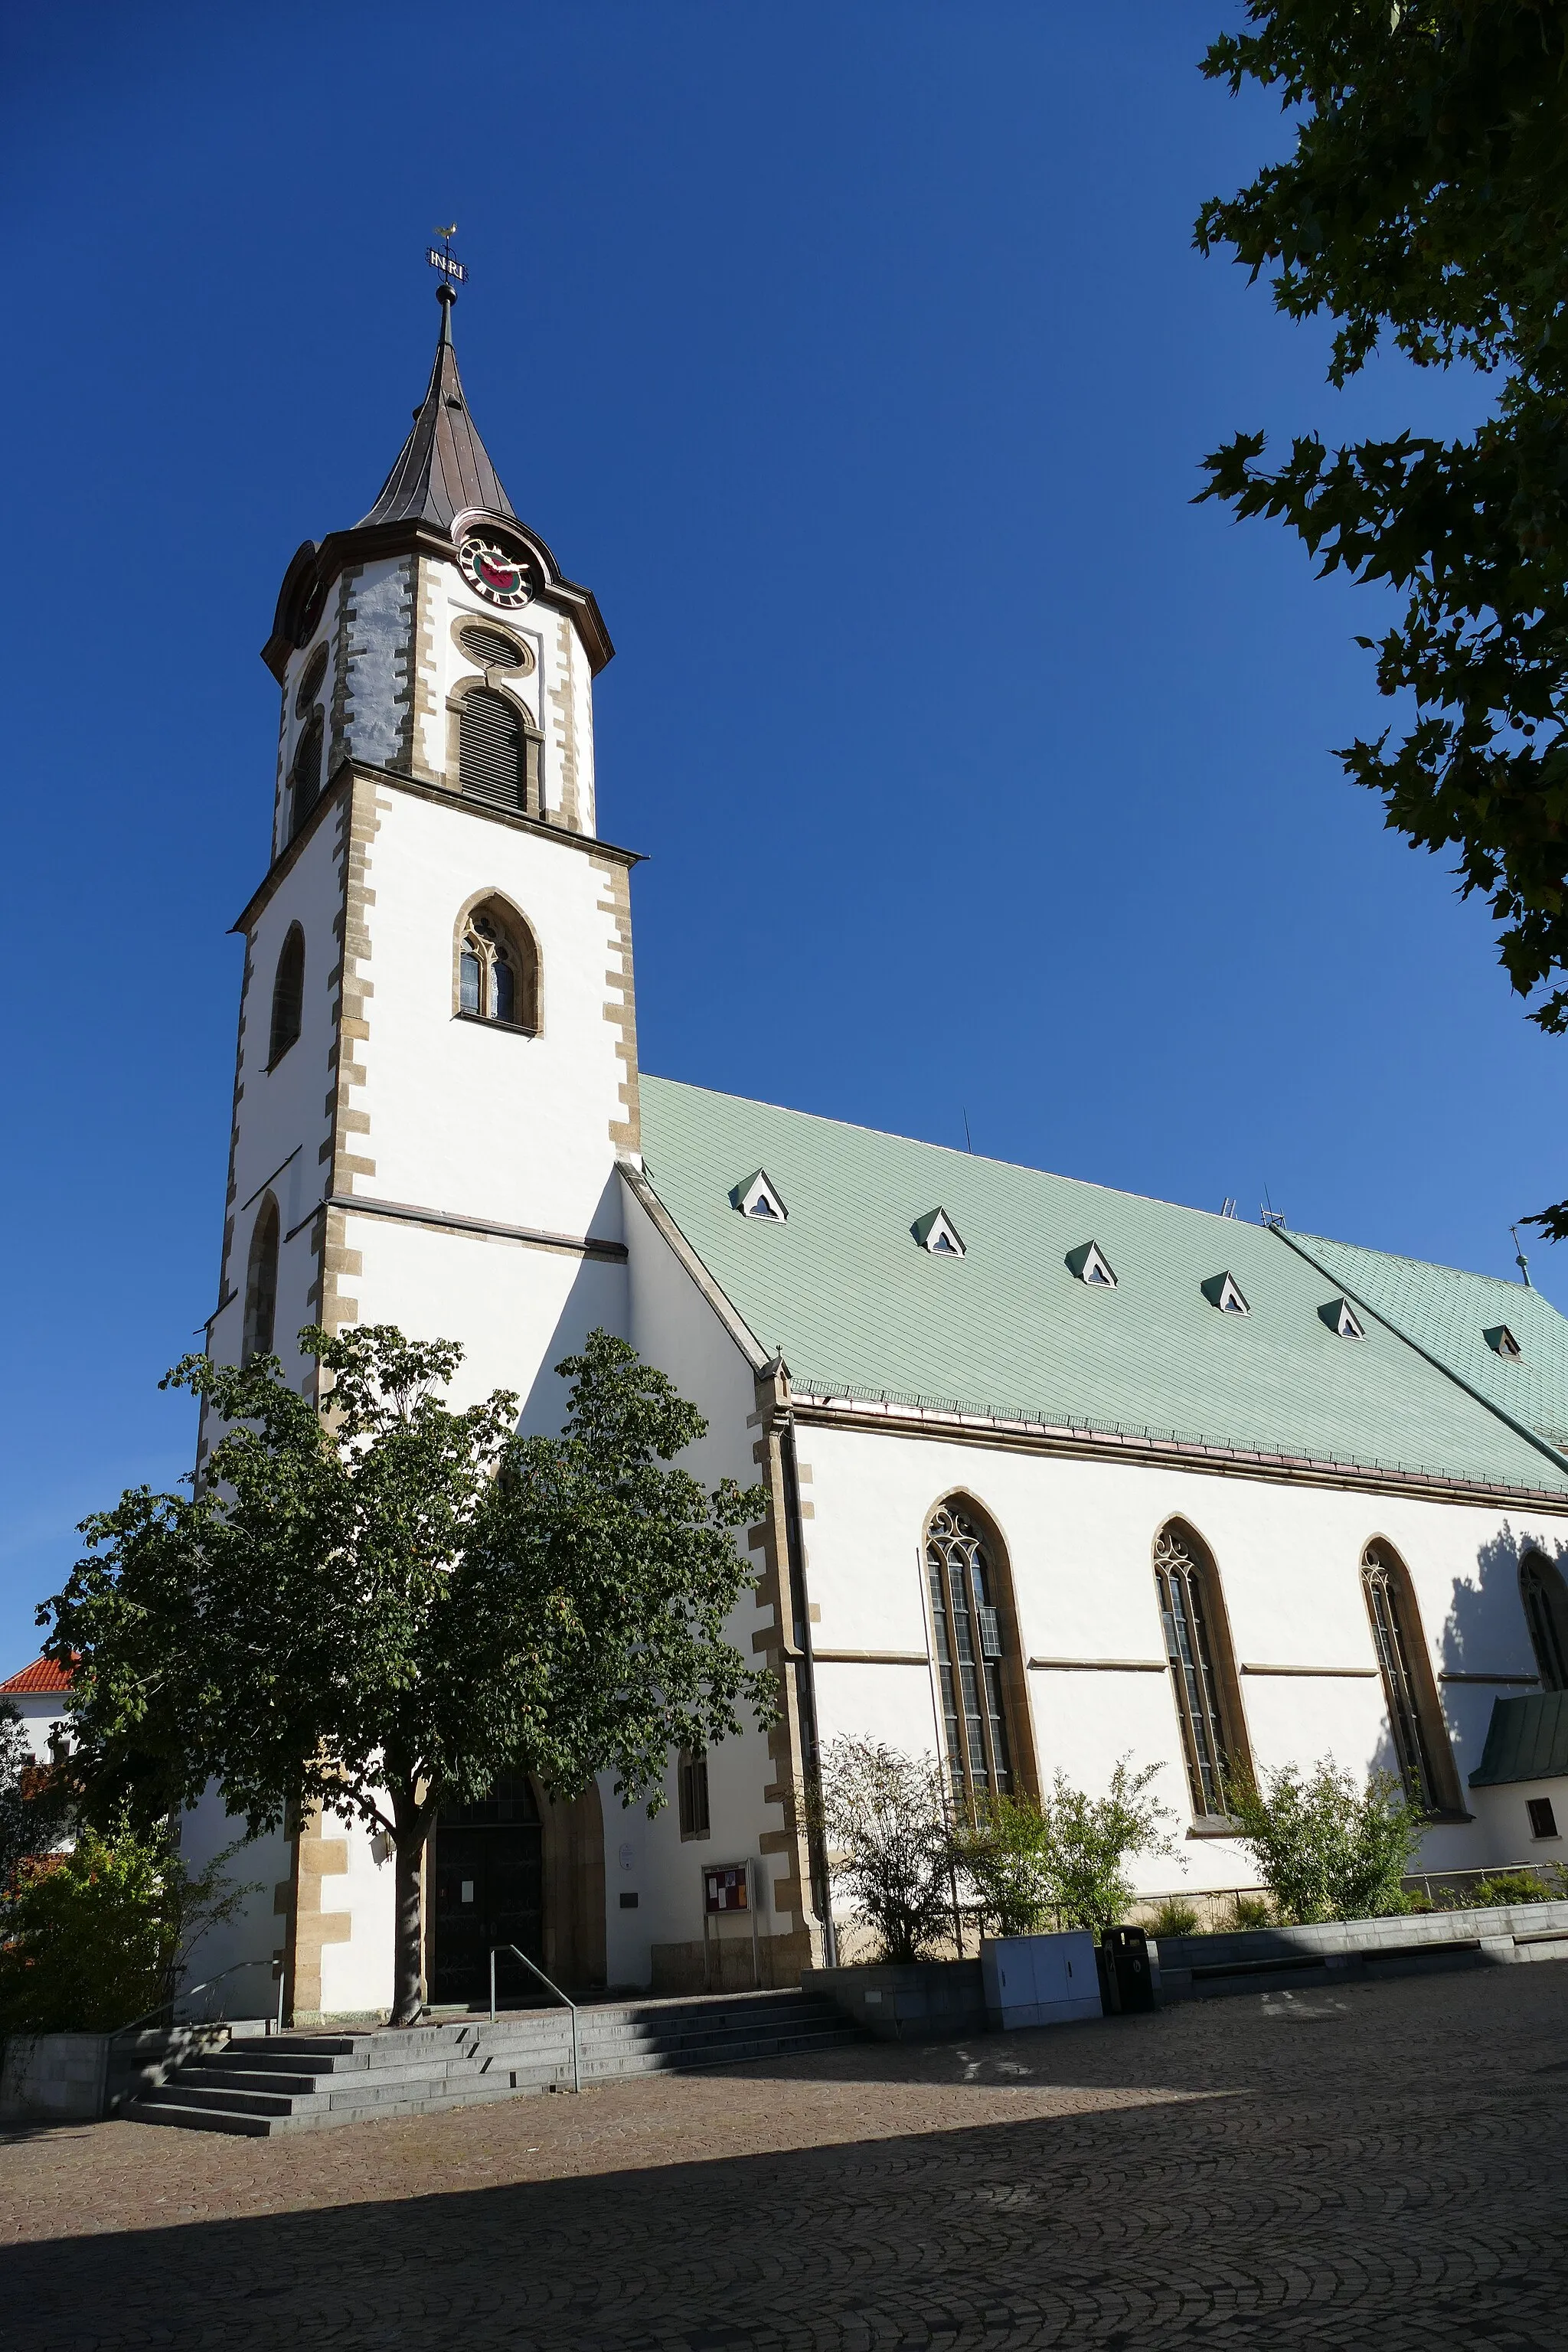 Photo showing: The church "Martinskirche" in Pfullingen  - view from the side